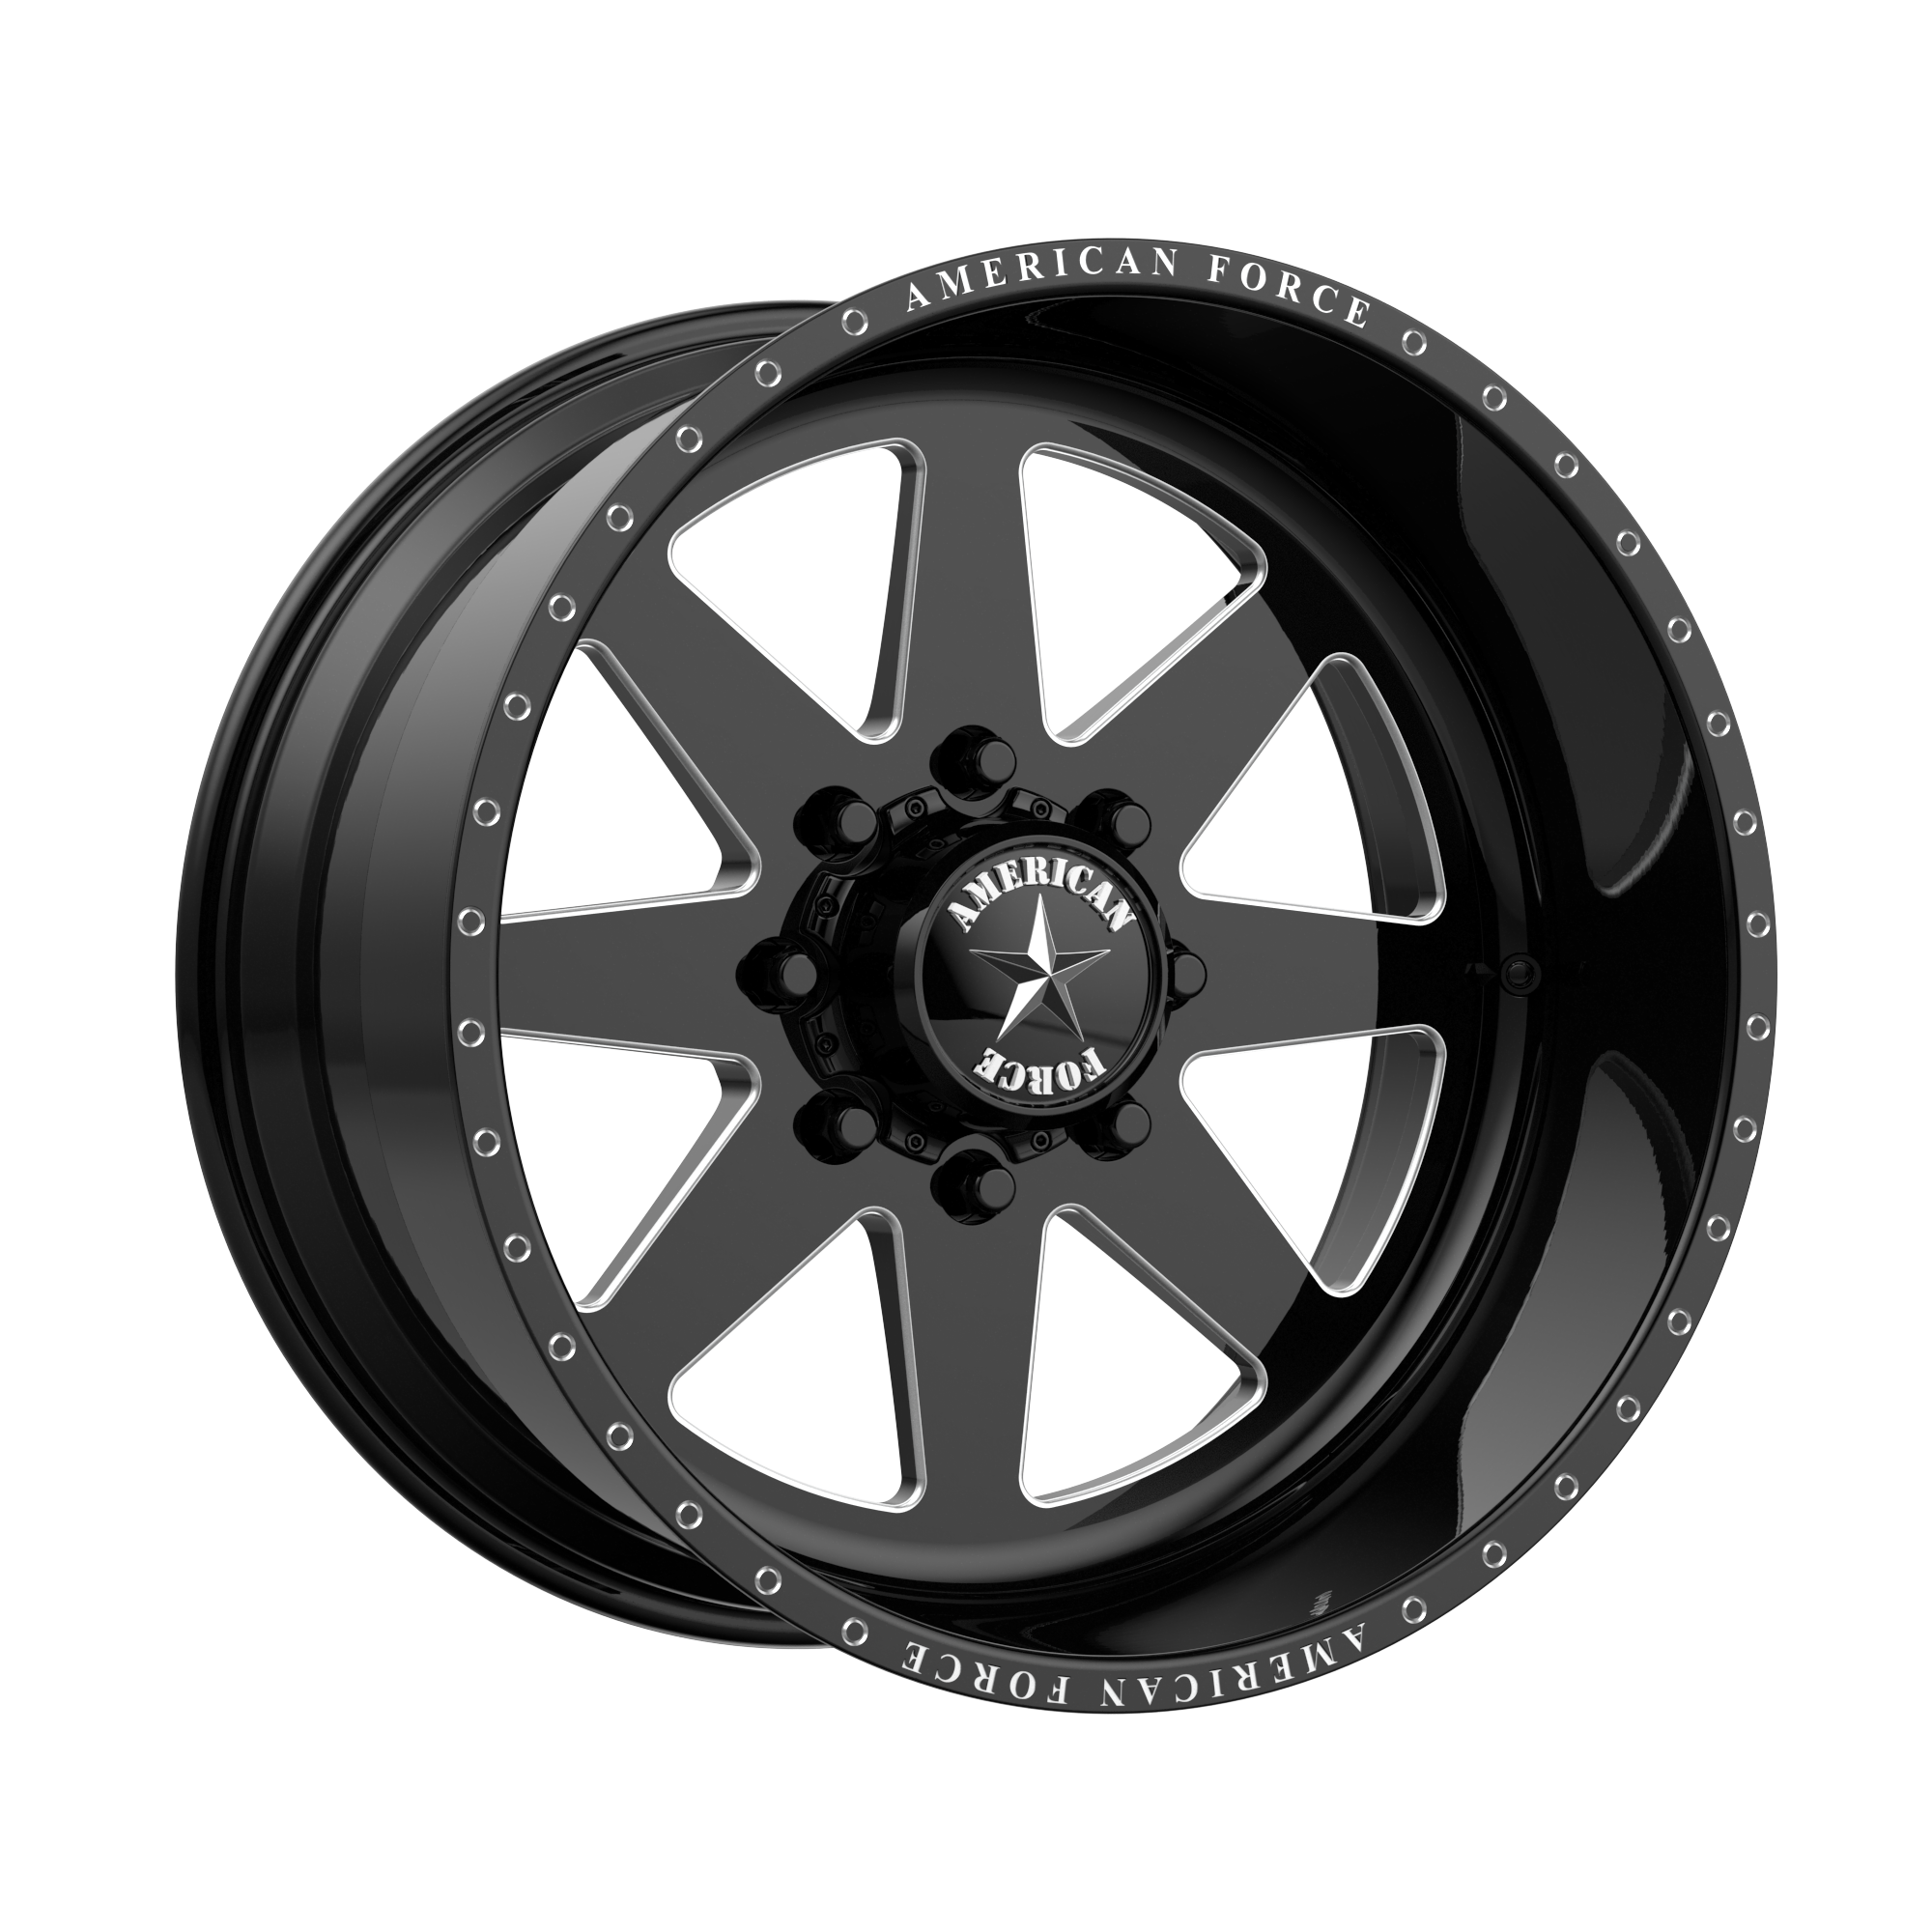 INDEPENDENCE SS 20x10 8x170.00 GLOSS BLACK MACHINED (-25 mm) - Tires and Engine Performance